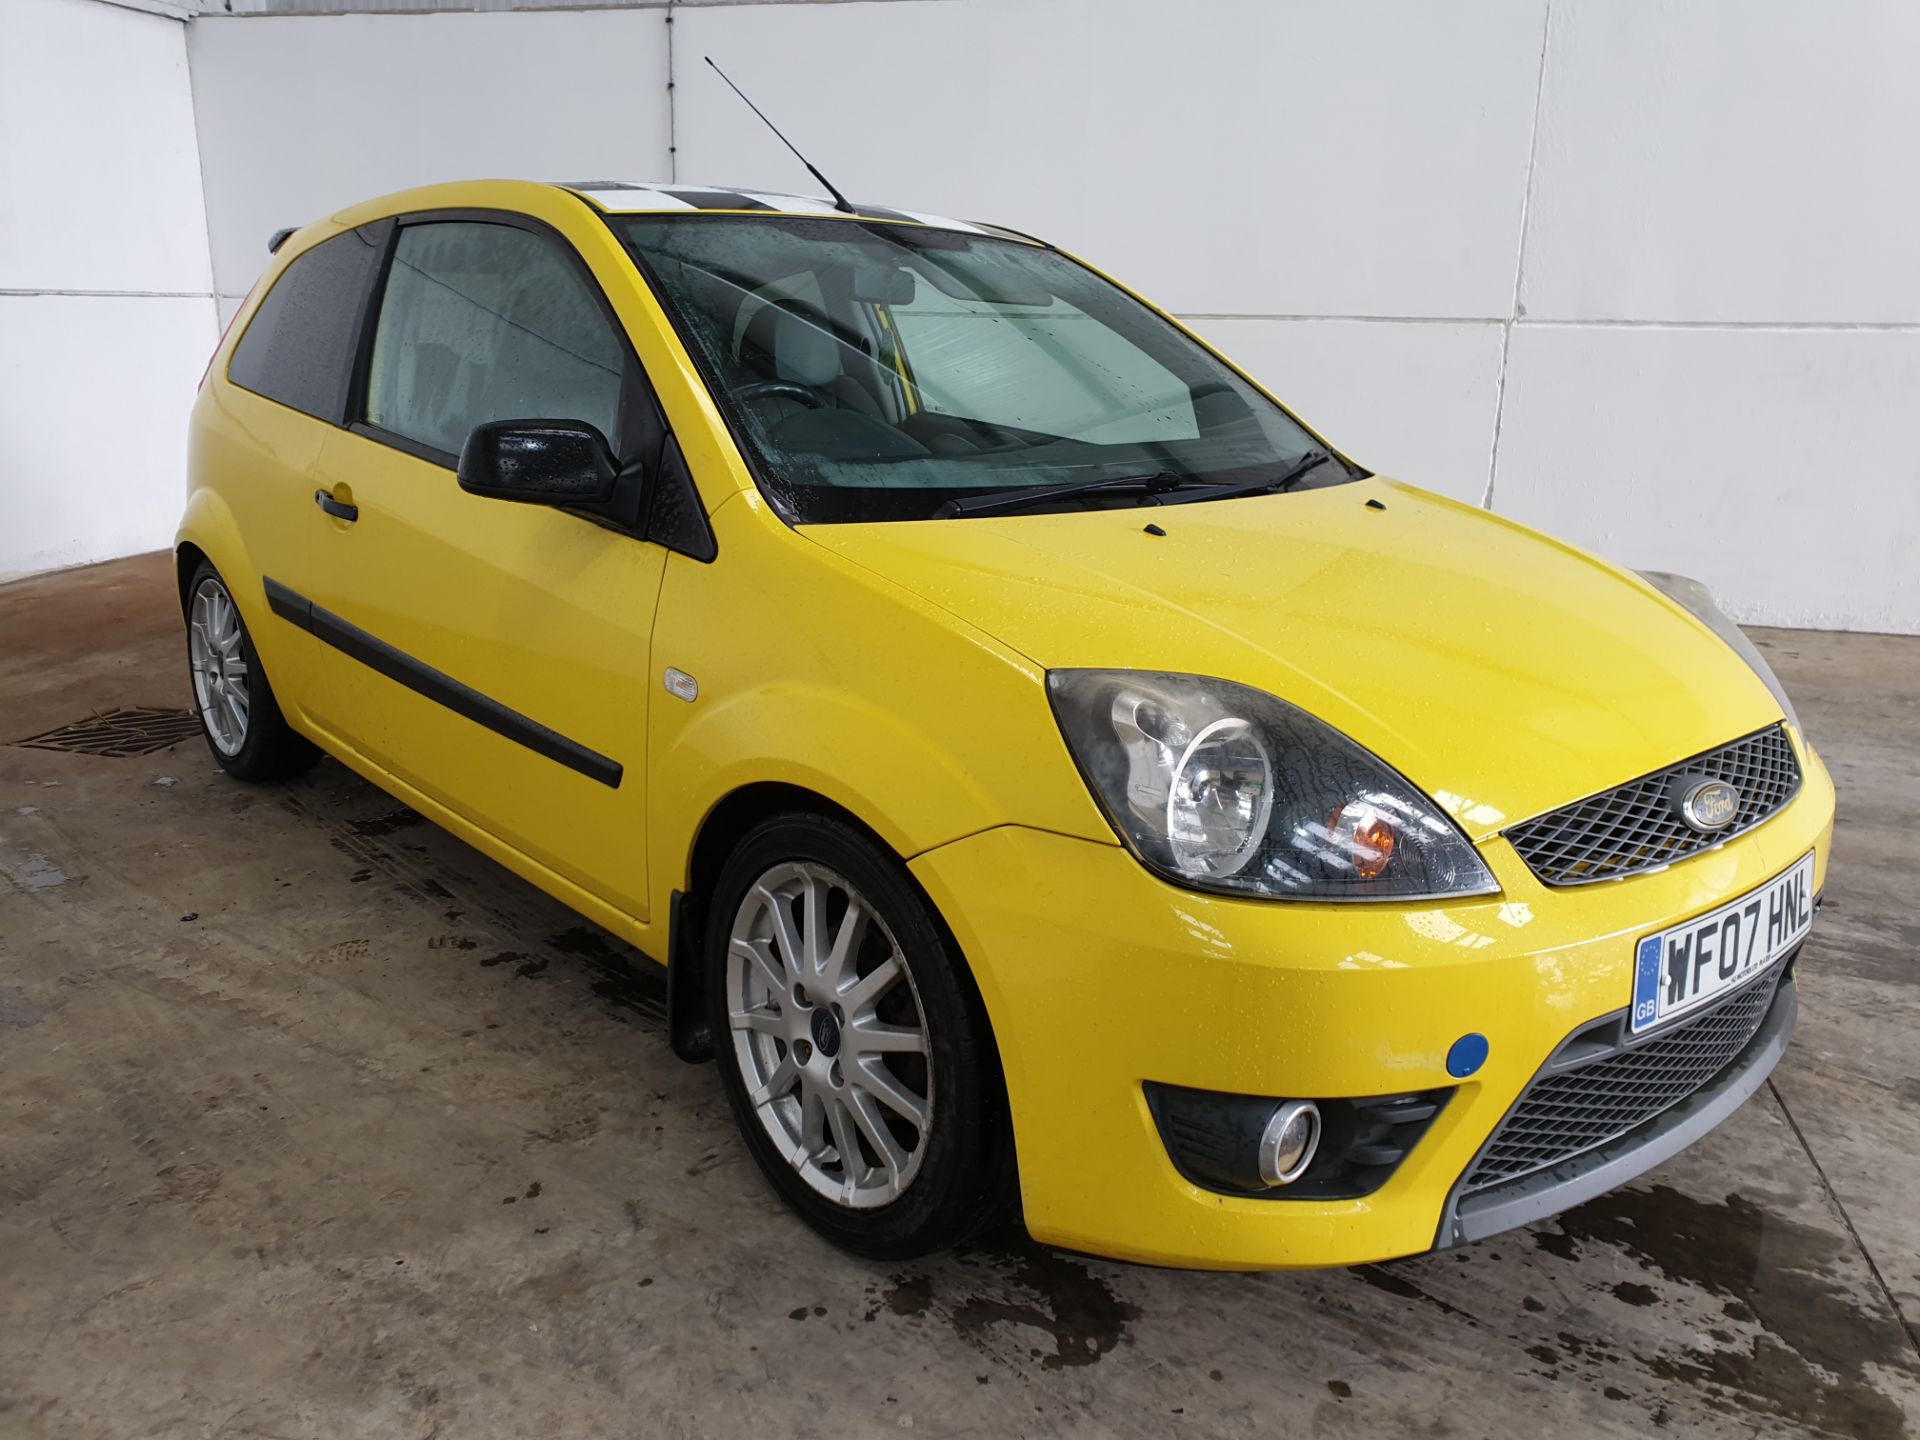 2007 Ford Fiesta Zetec S Special edition